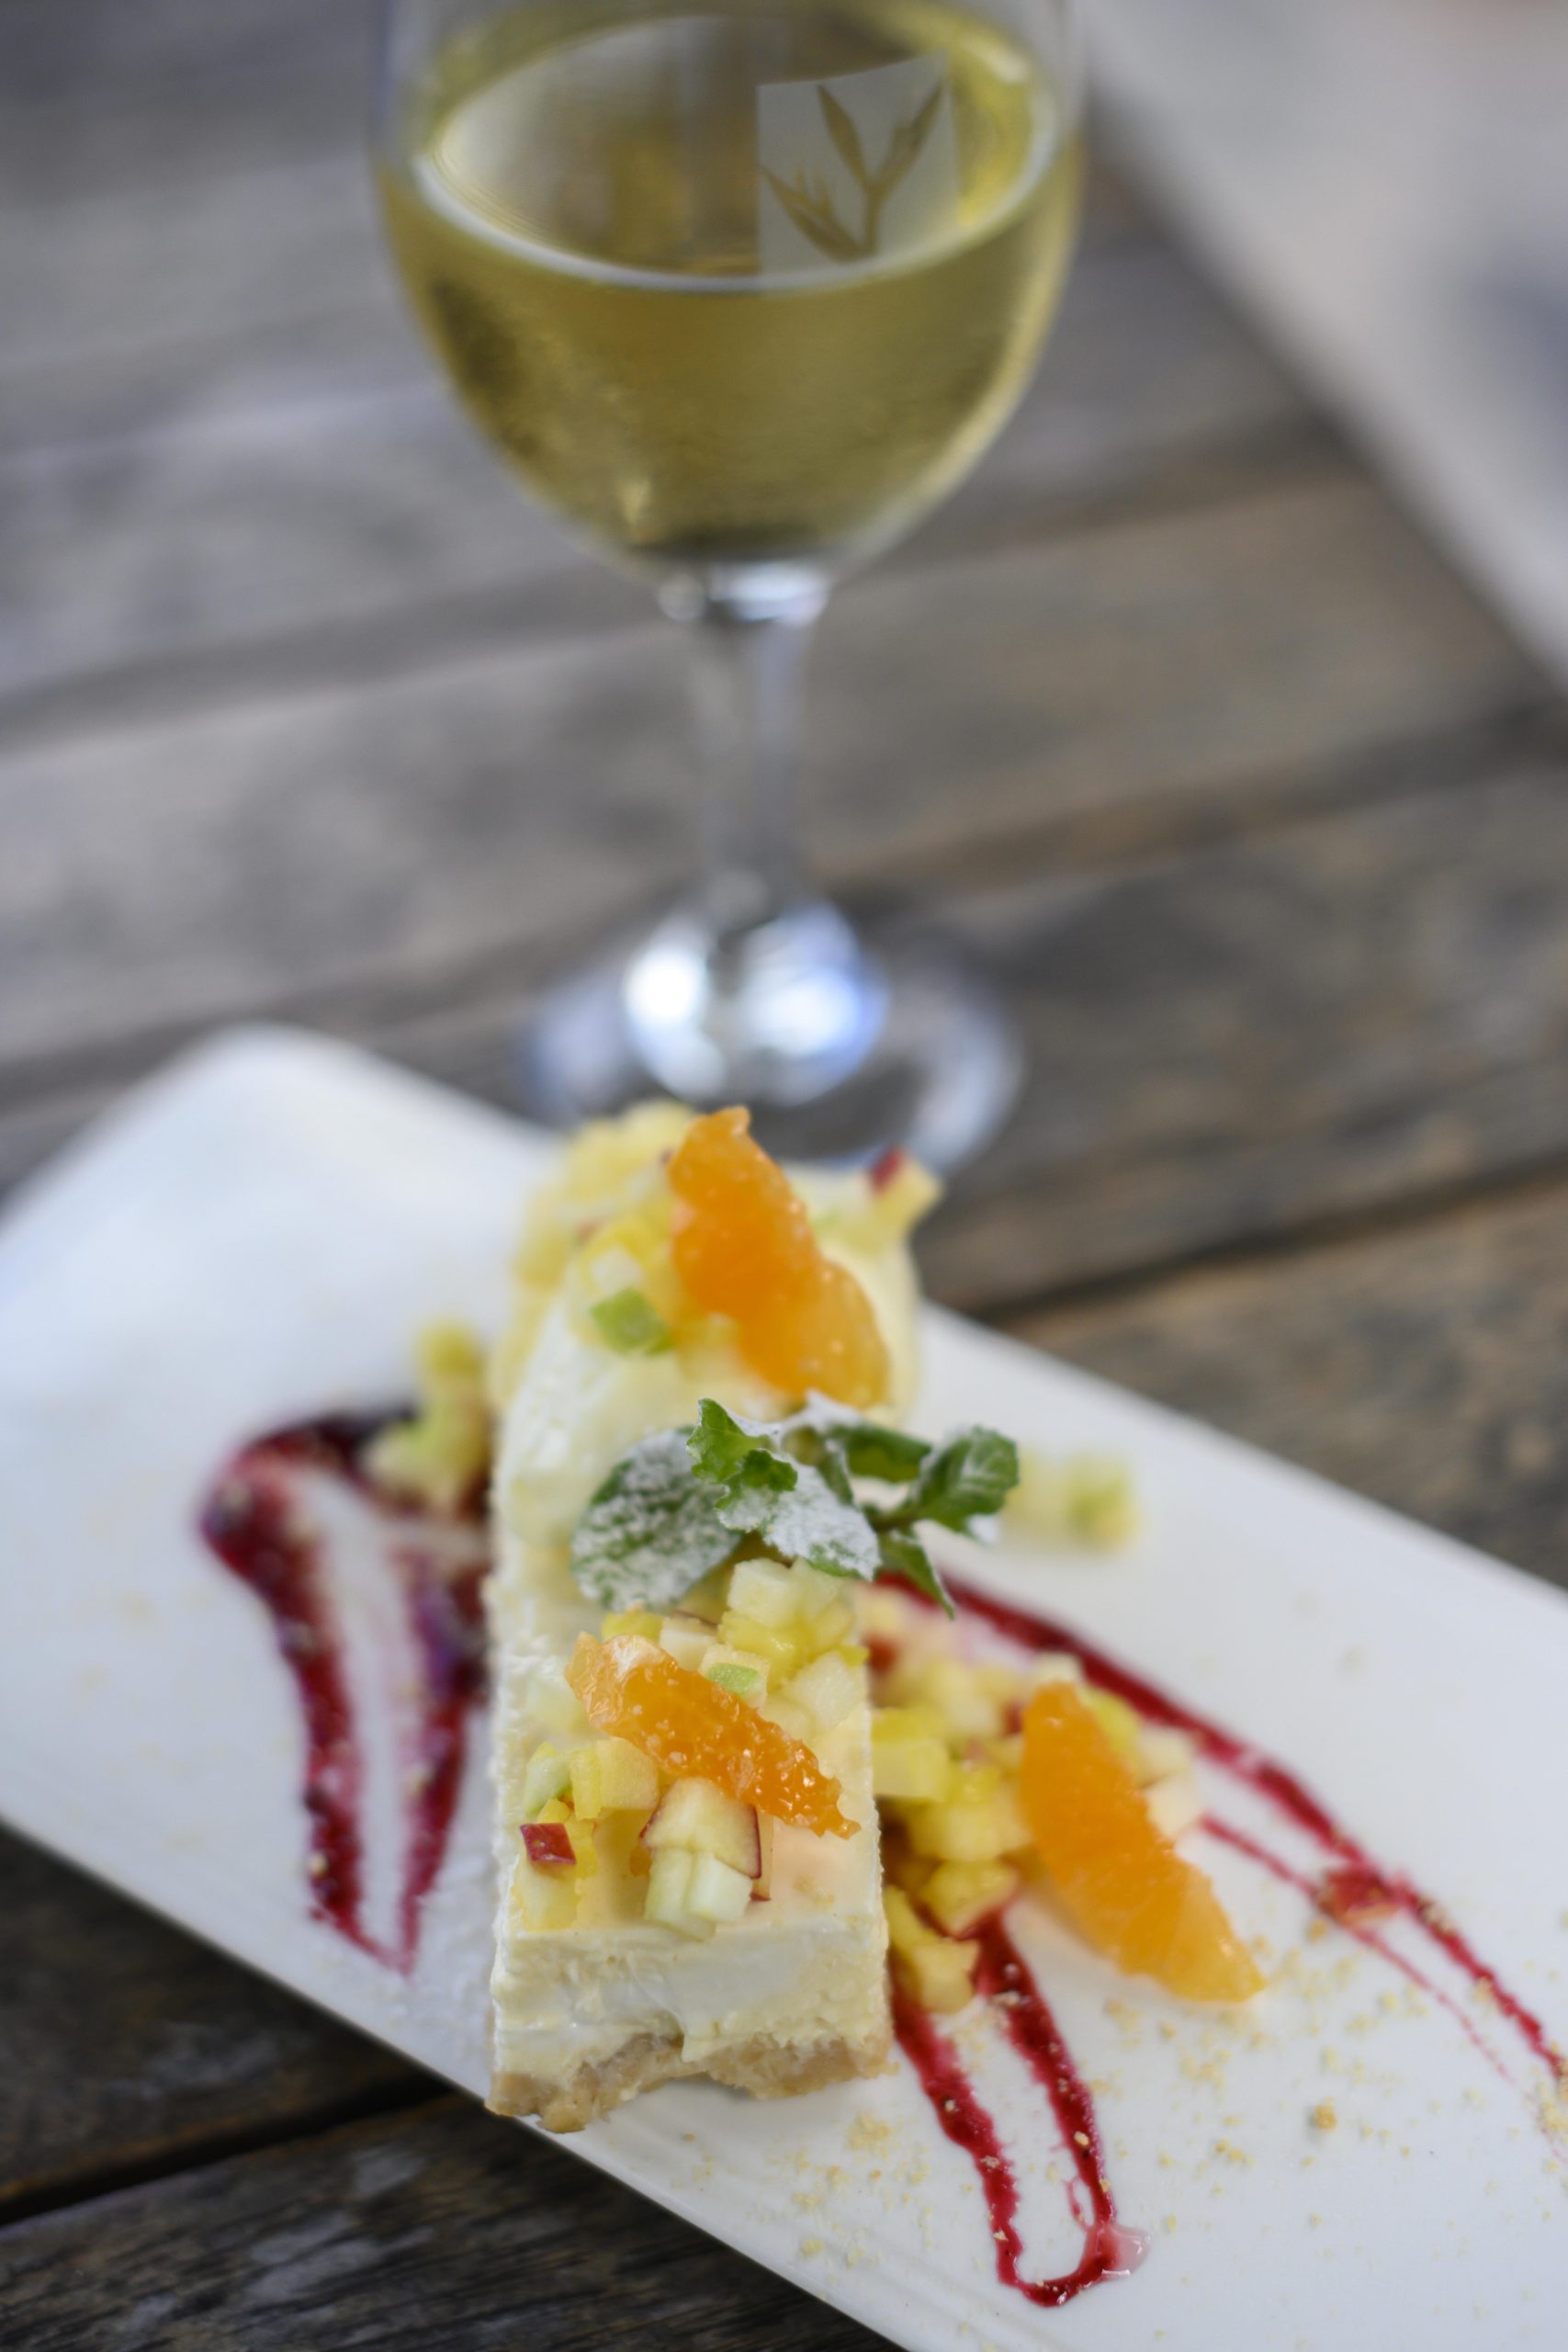 a delicious dessert garnished with thin slices of orange, served with a glass of white wine